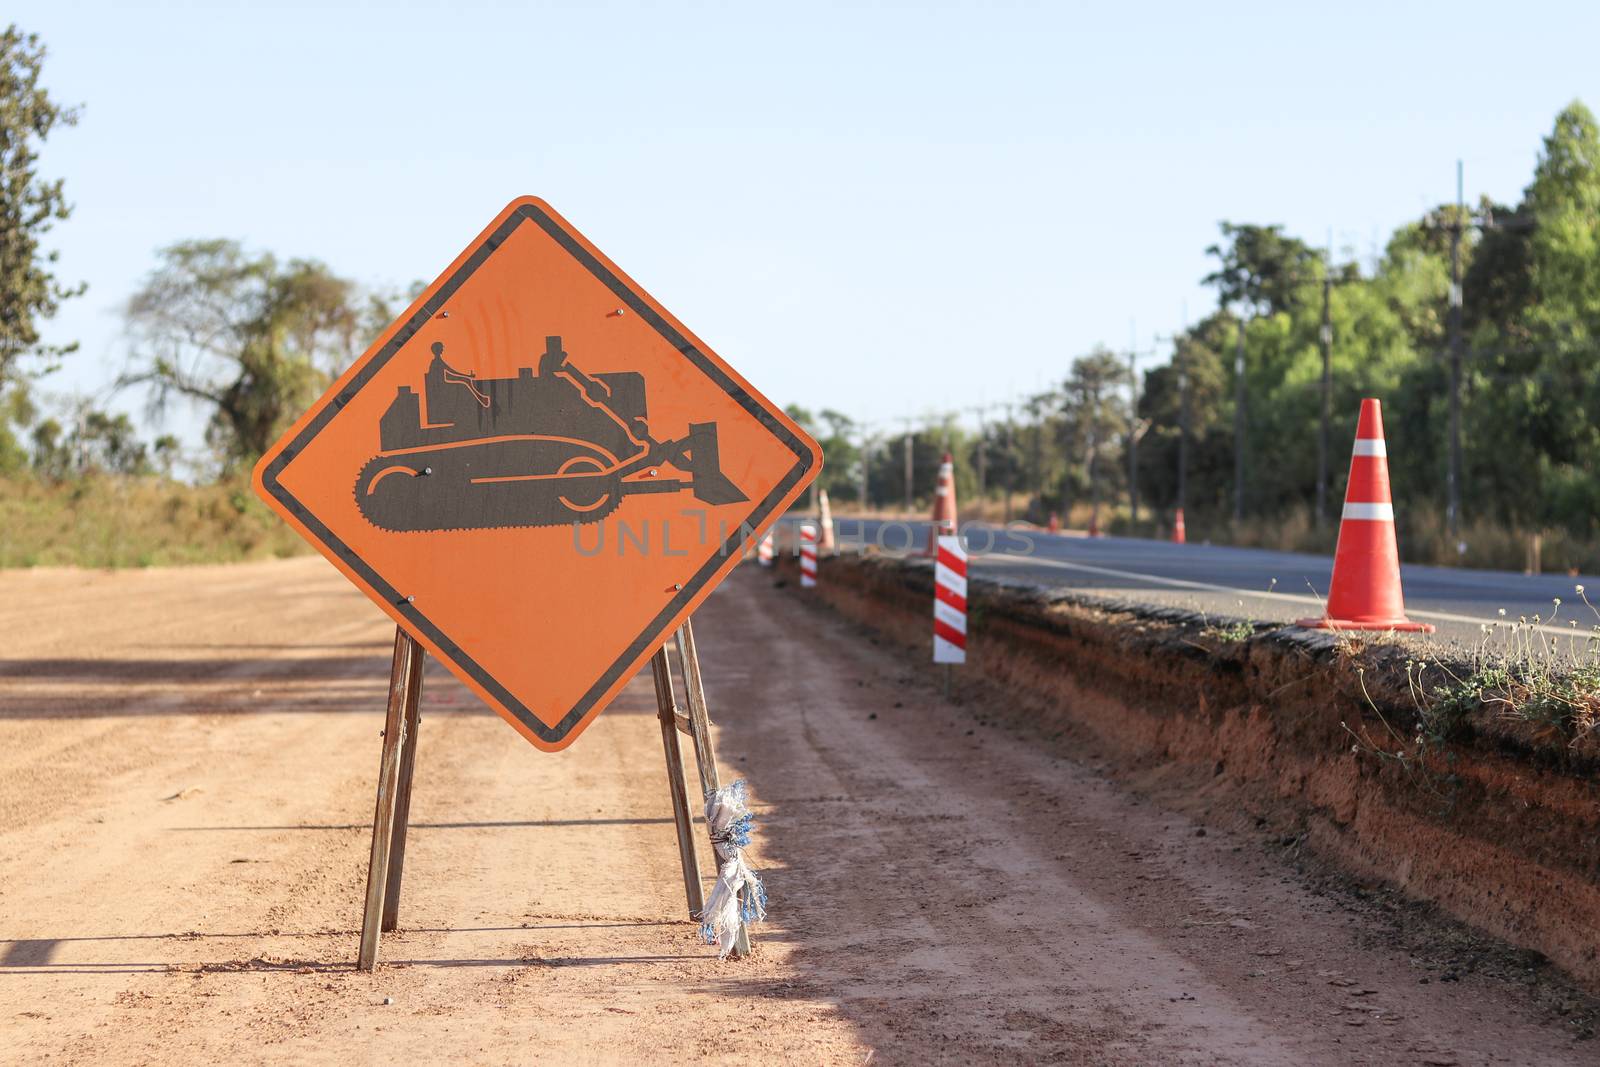 The orange sign shows the machine symbol being operating on the side of the road. Warning sign indicating road work is ahead.